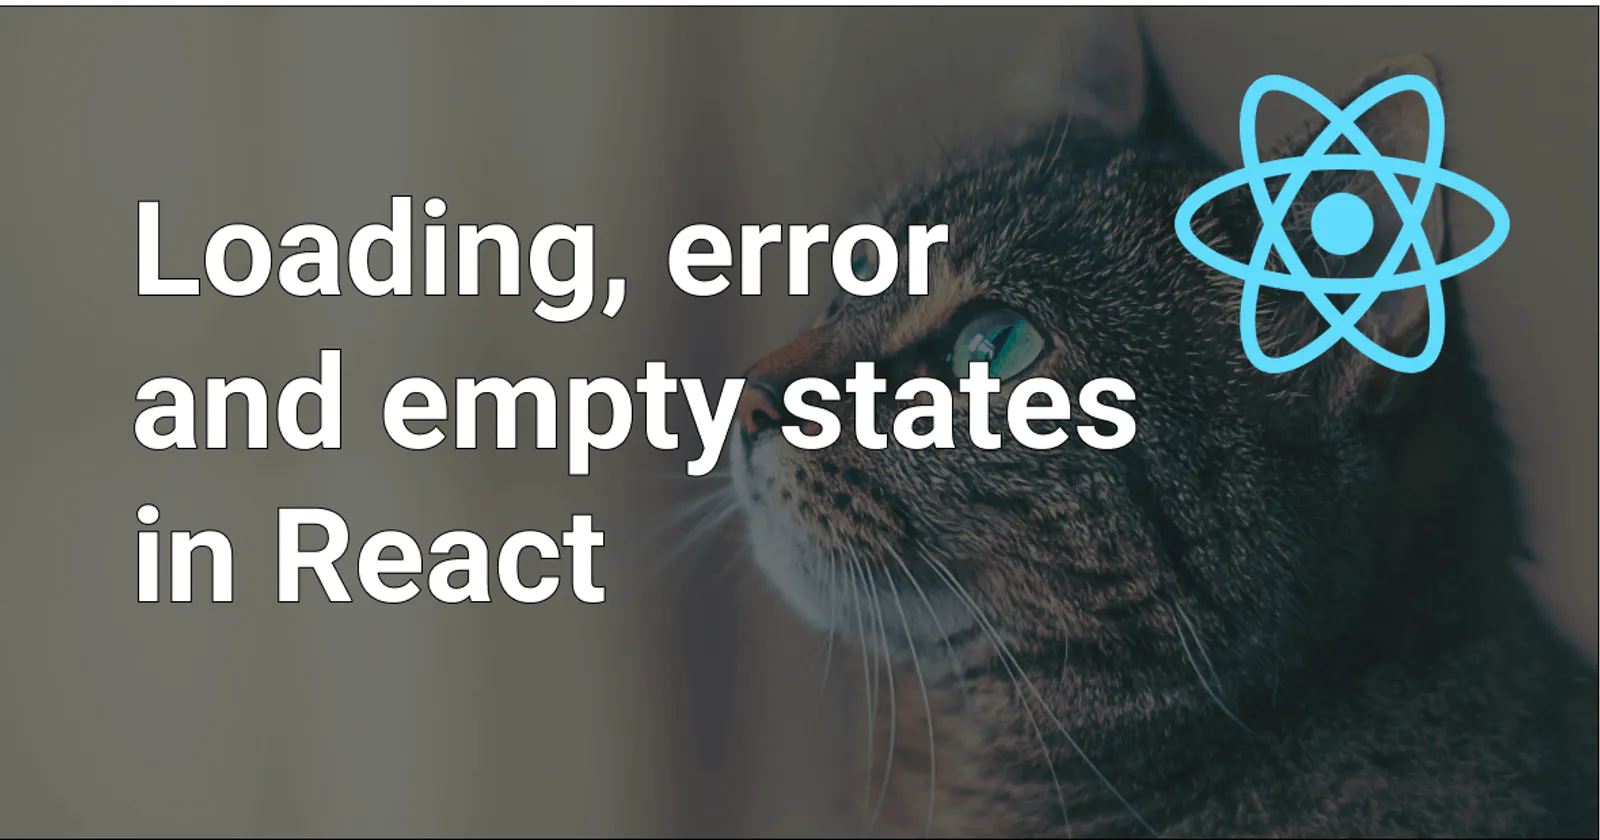 Good practices for loading, error, and empty states in React